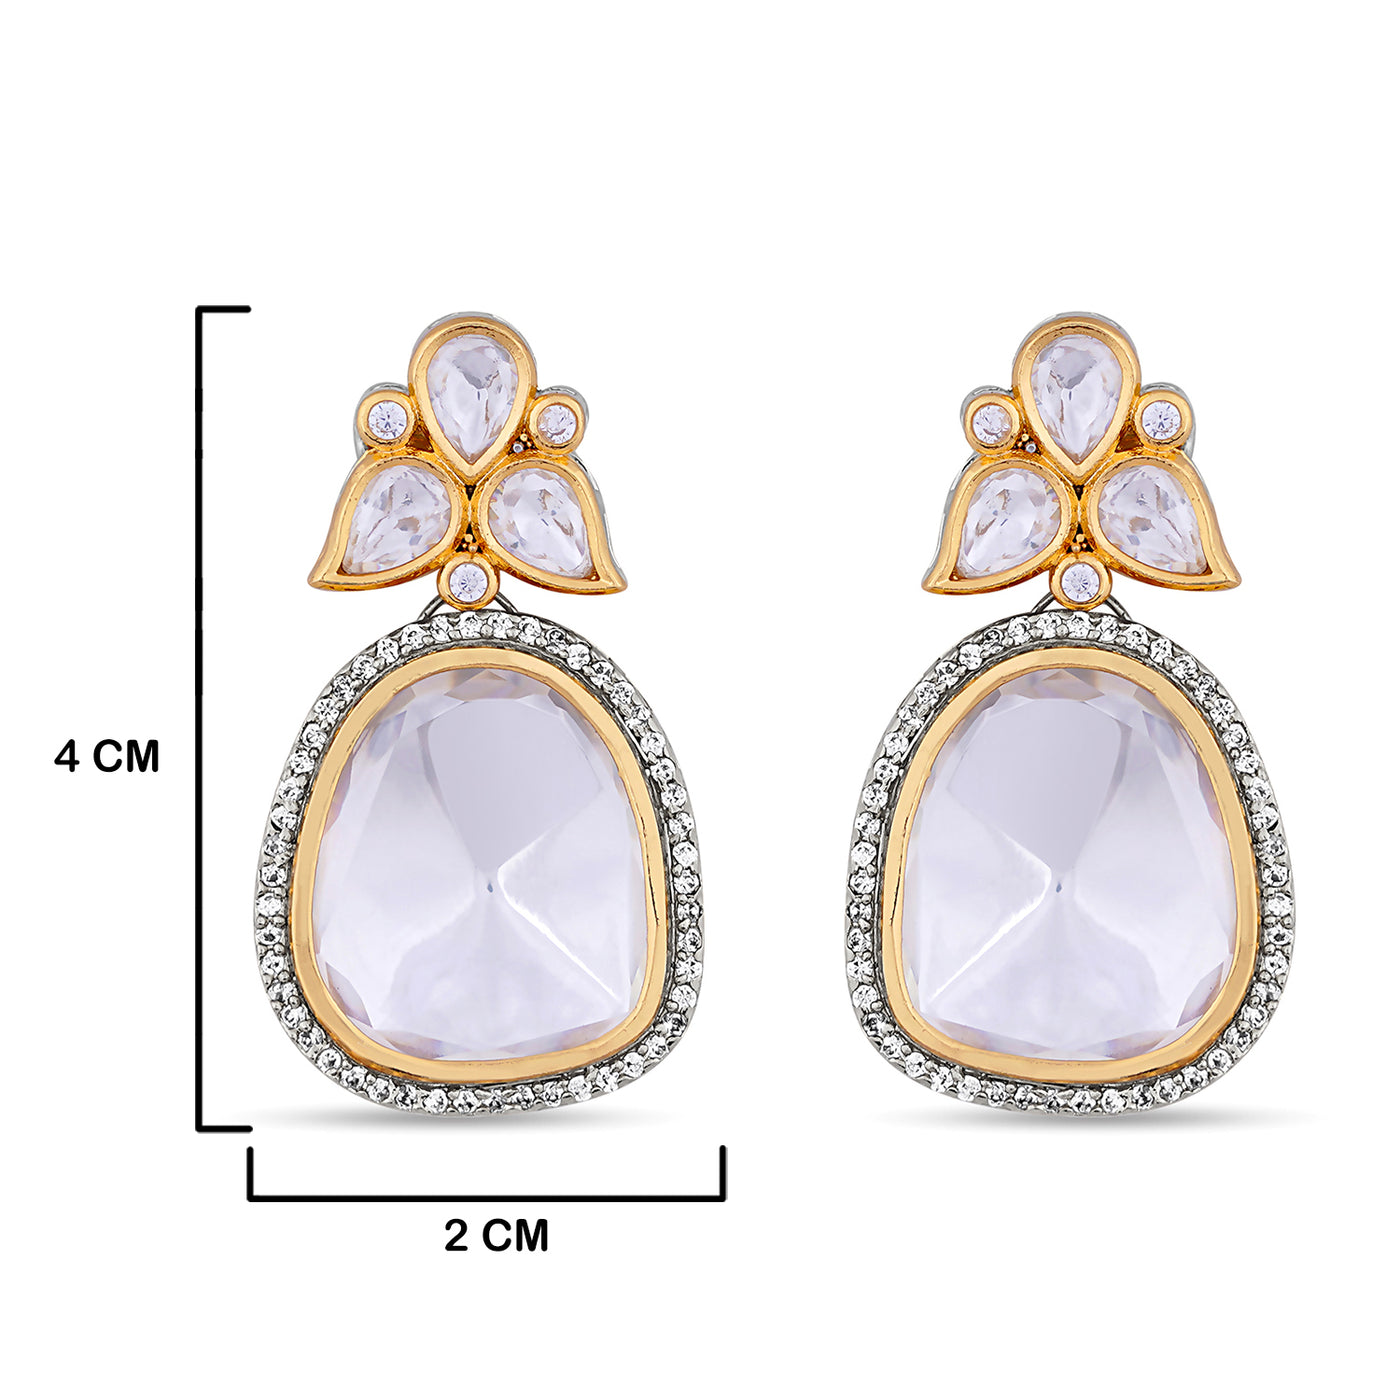 CZ Outlined Polki Earrings with measurements in cm. 4cm by 2cm.